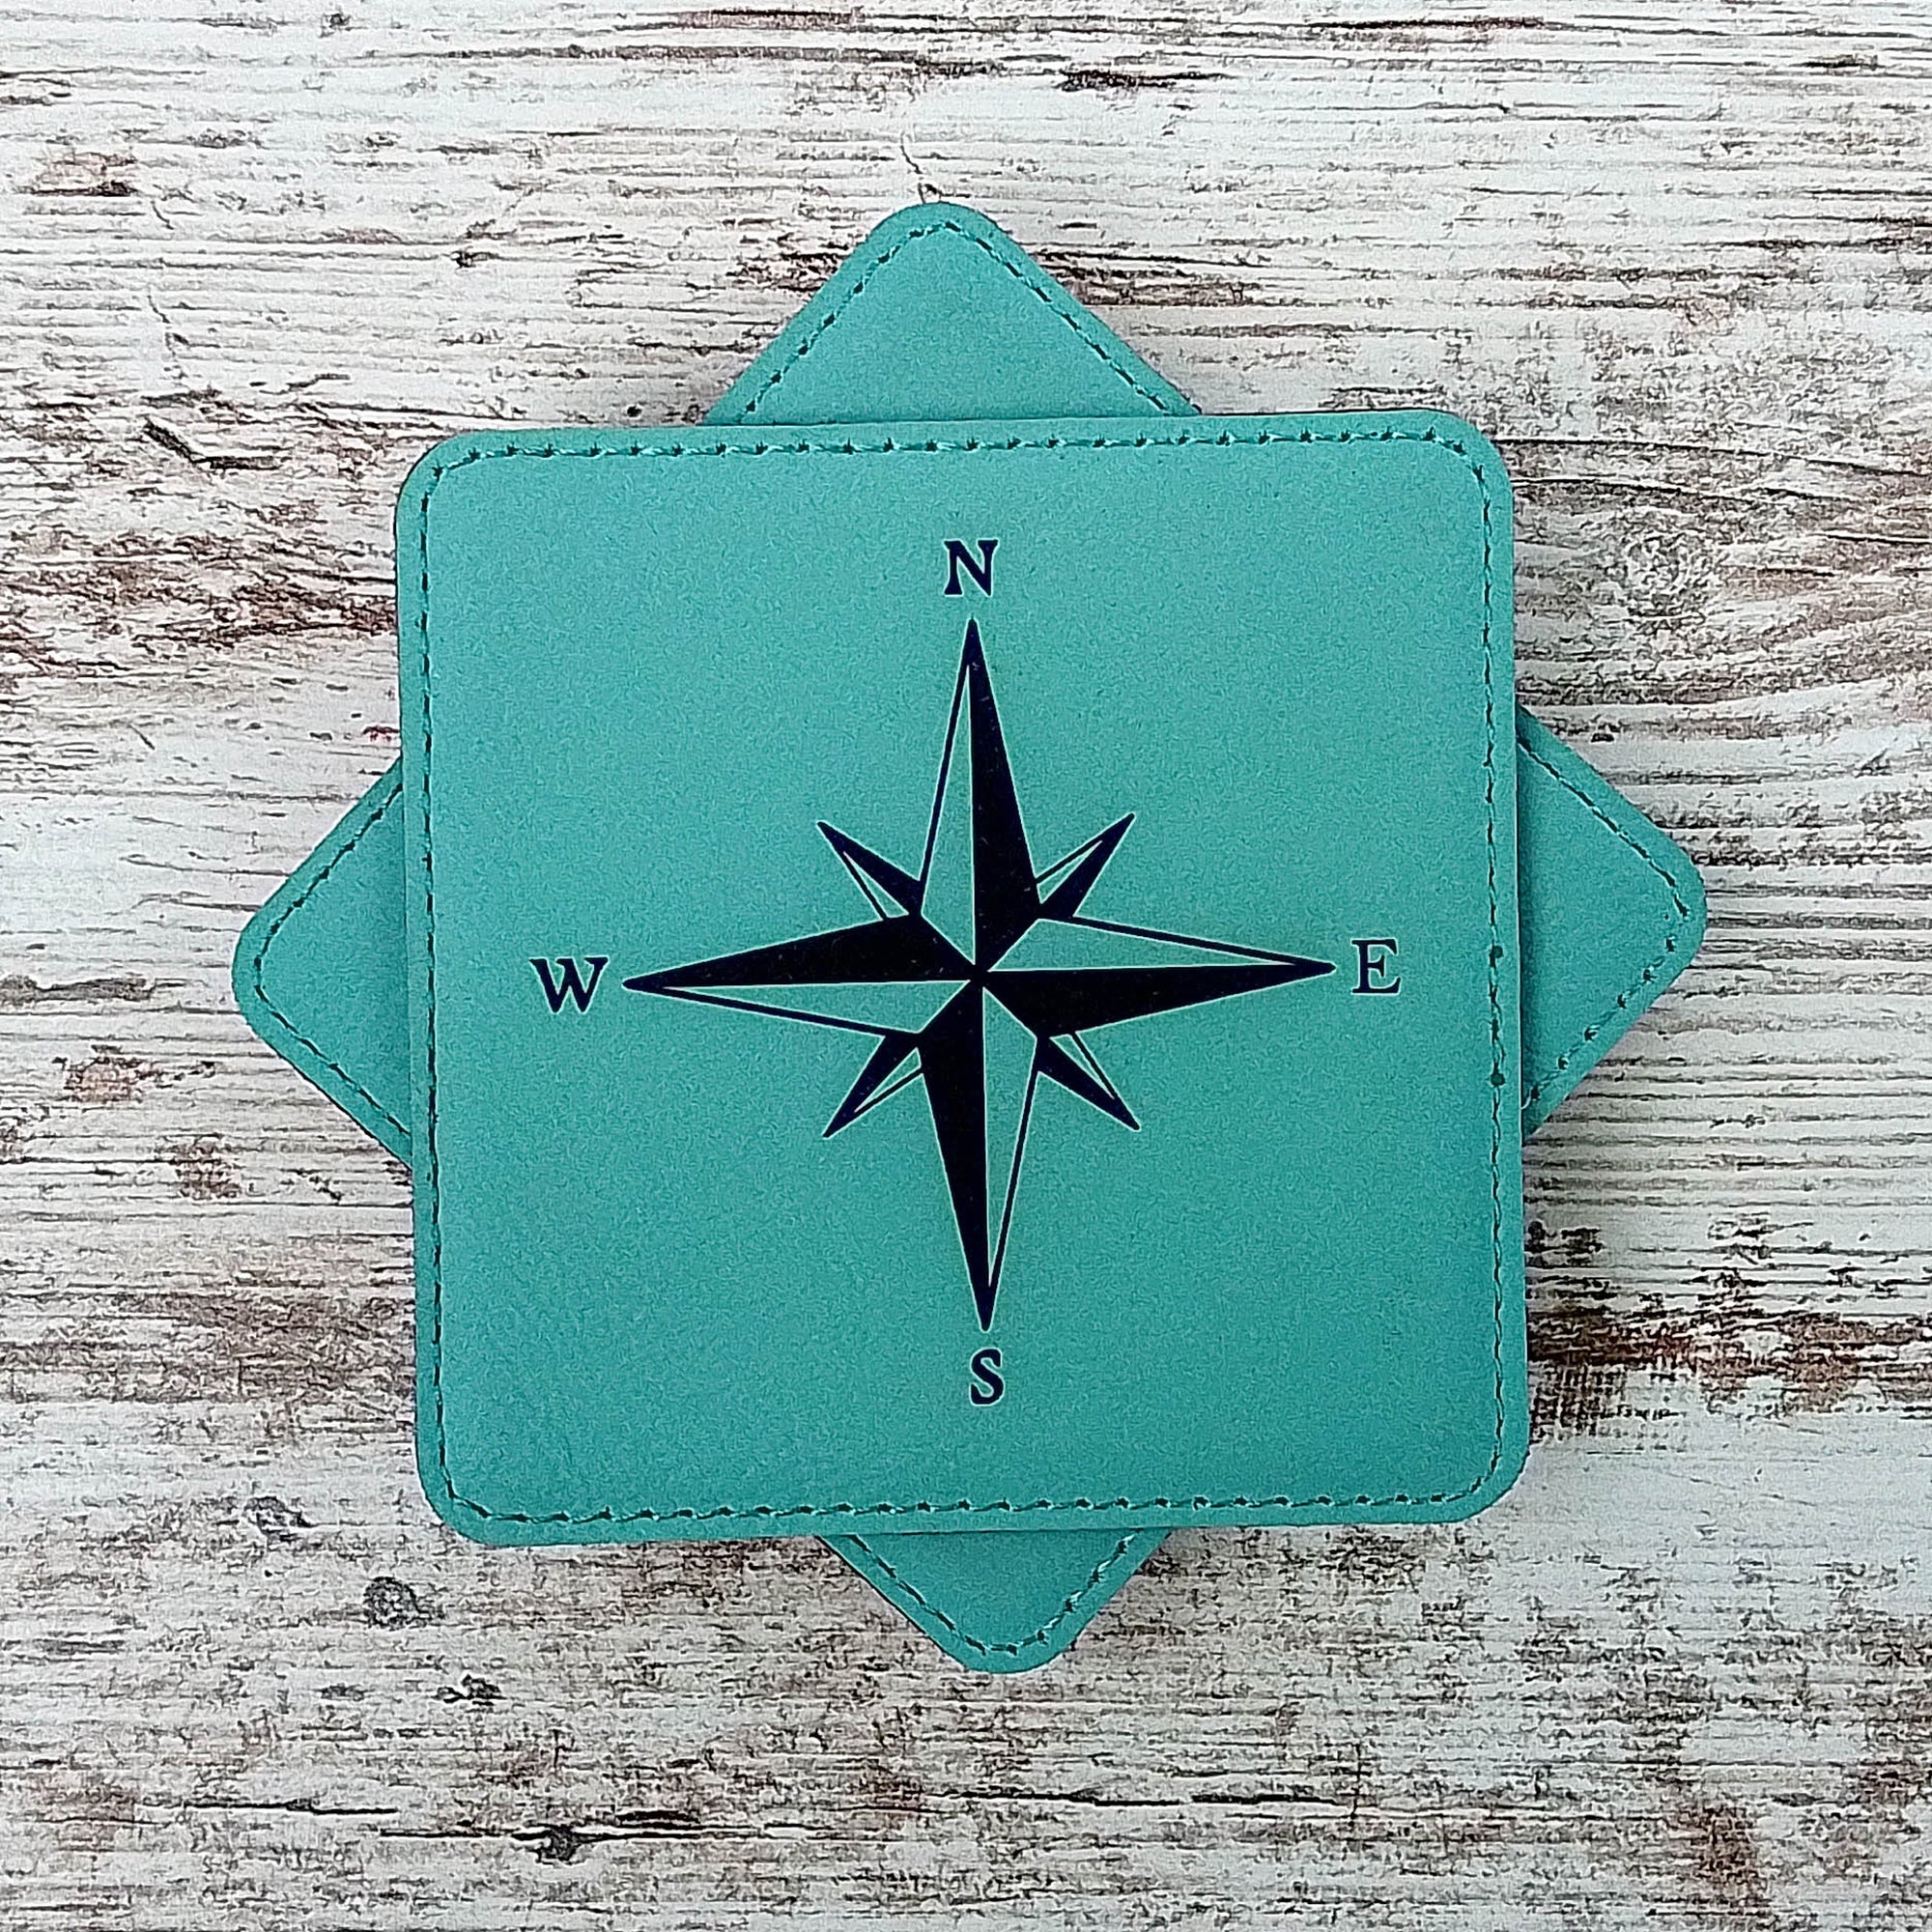 Nautical Compass Coasters, Sailing Gifts, Boating Coaster, Boat Coaster, Barware Coasters, Barroom, Set of 6 With Holder vrs 2